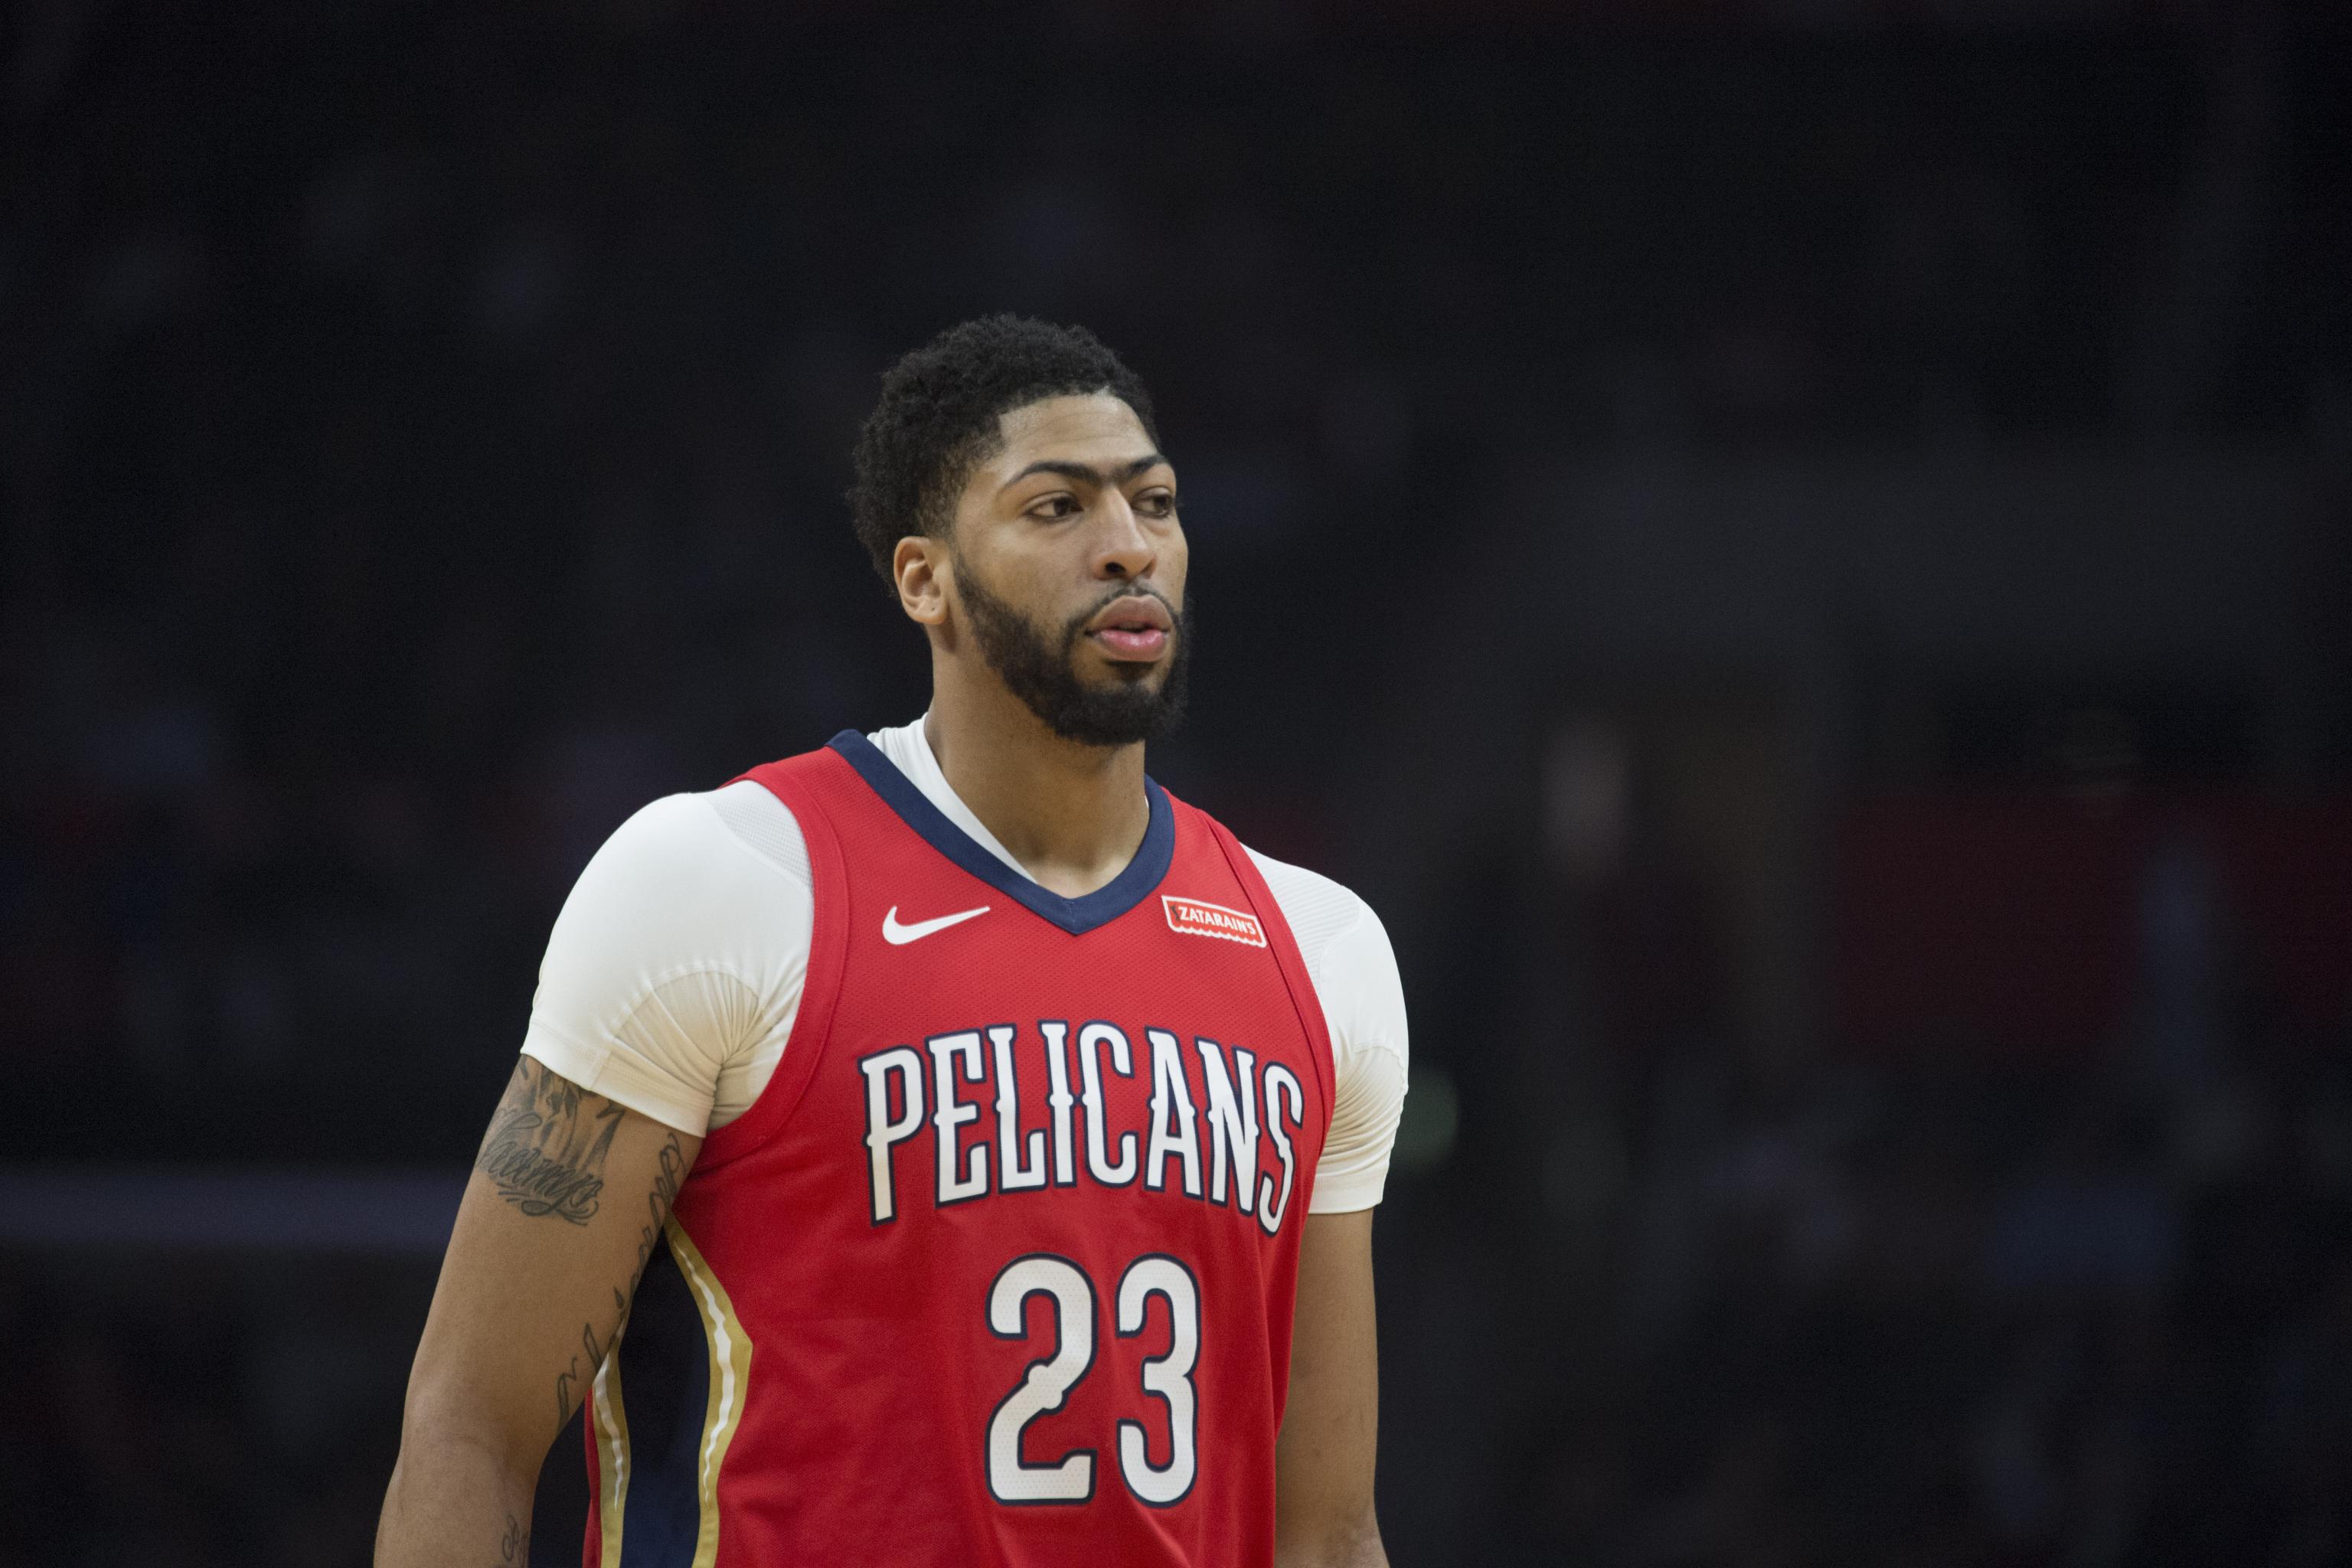 Paul Pierce Anthony Davis Traded To Lakers Or Celtics If Pelicans Start Poorly Bleacher Report Latest News Videos And Highlights